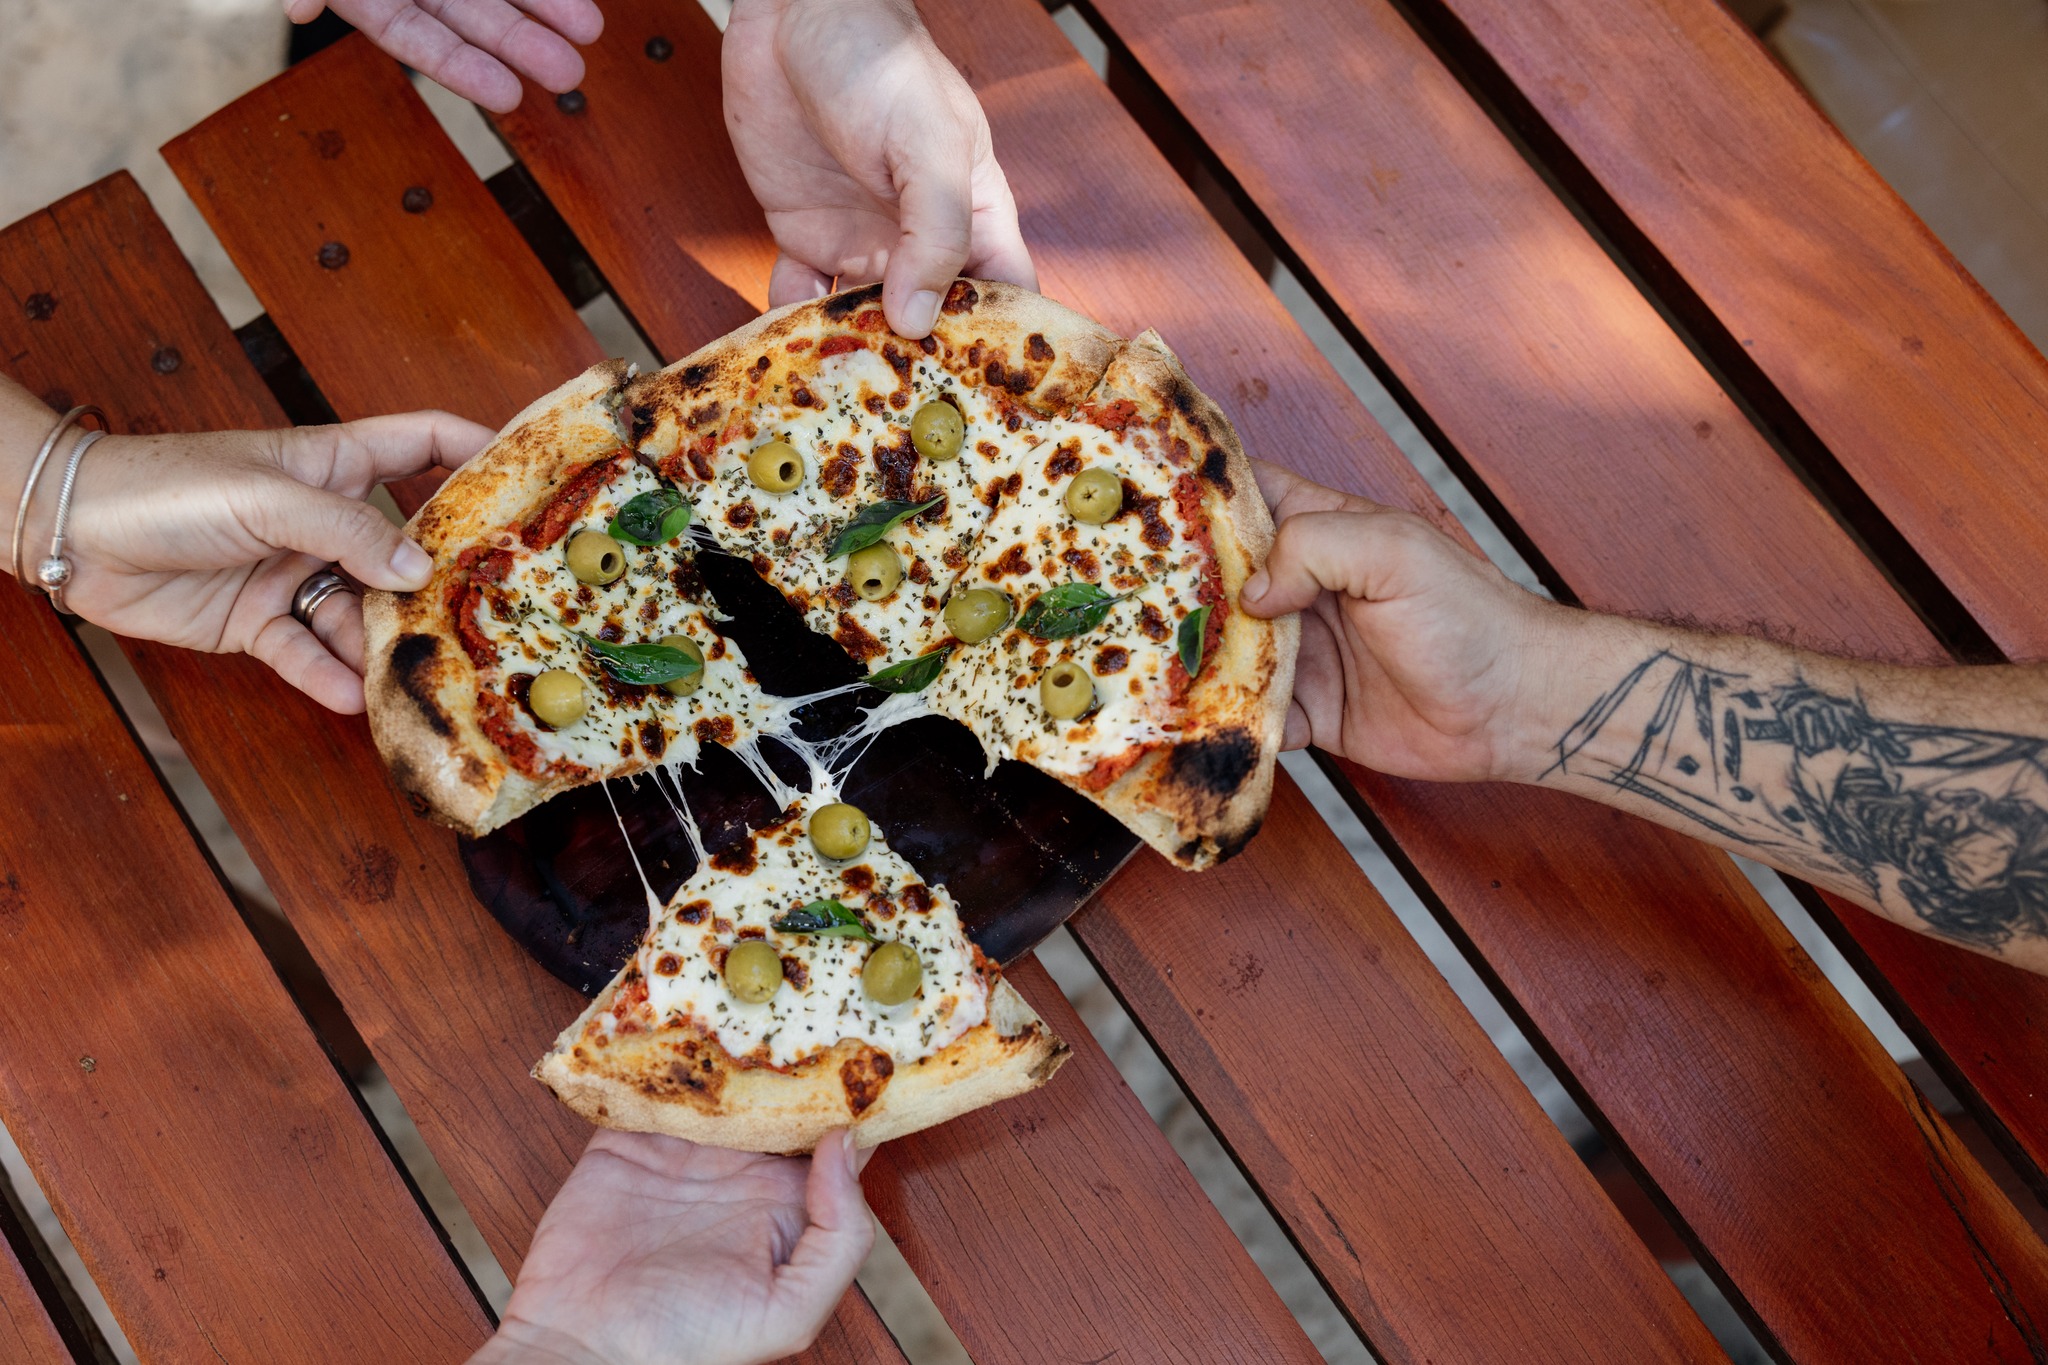 Hands of 4 people each taking a slice of vegetarian pizza at Unico Beach Club in Puerto Morelos.